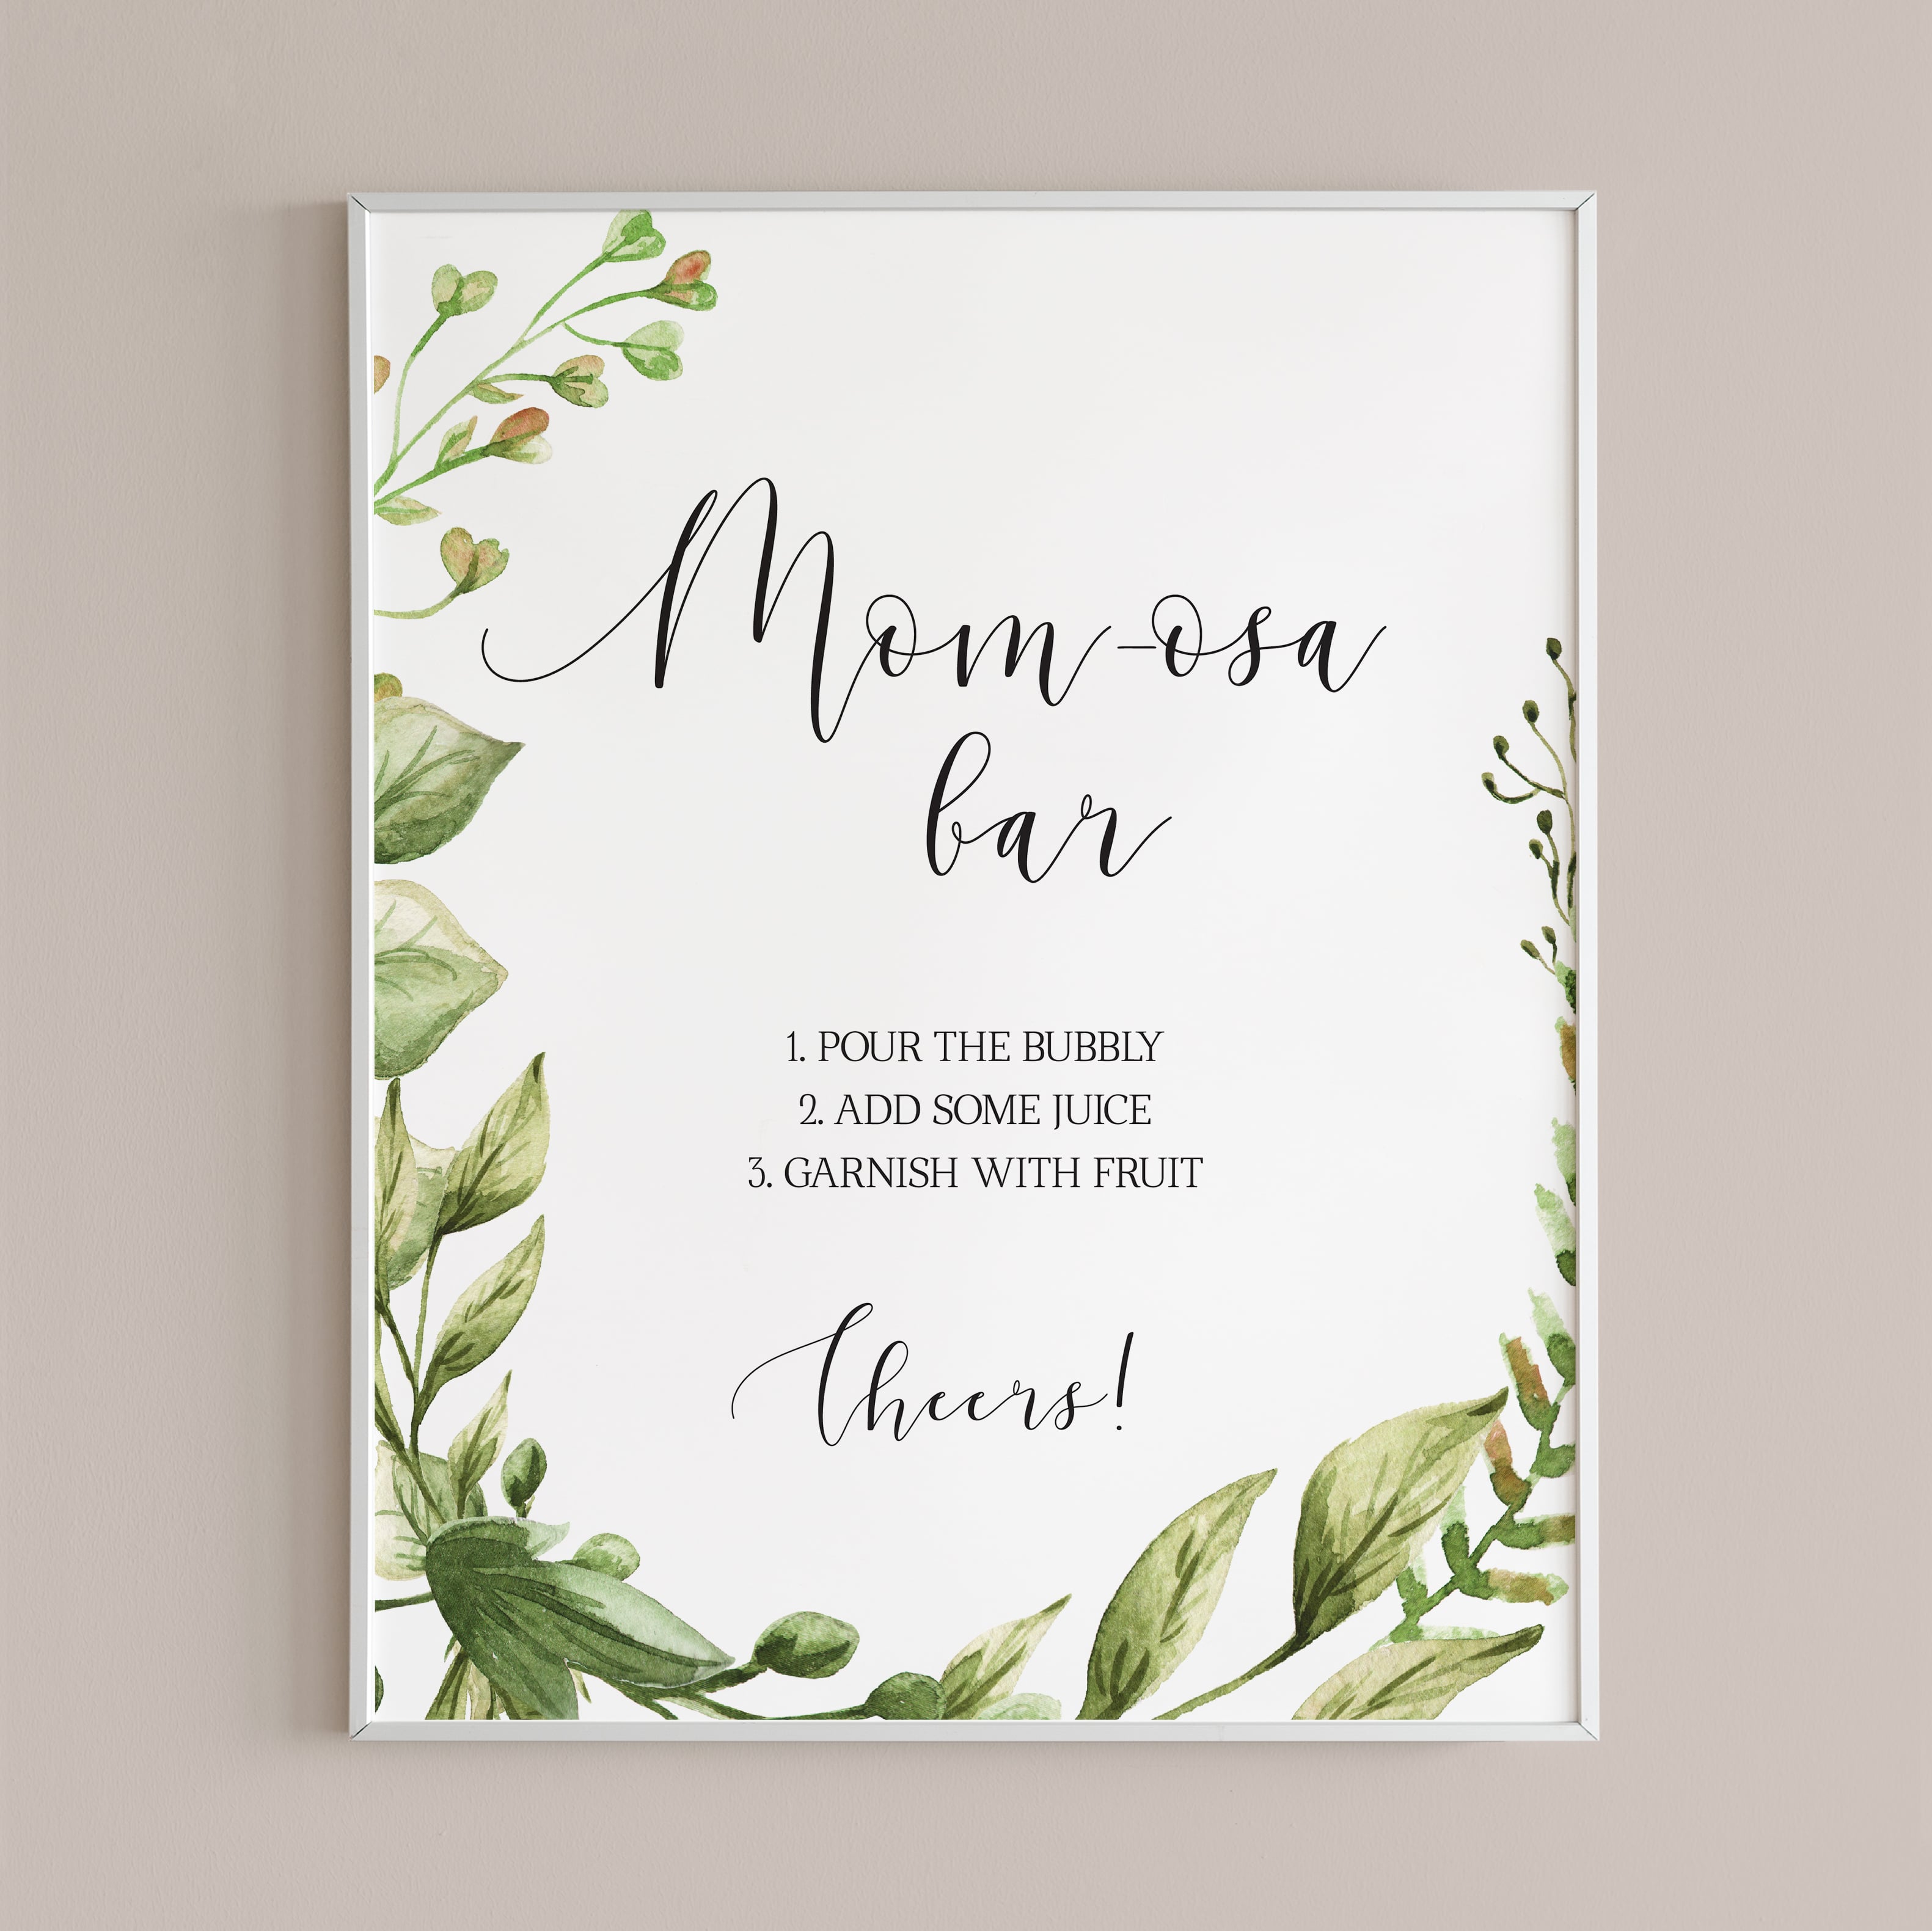 Momosa bar table sign greenery baby shower decor instant download by LittleSizzle